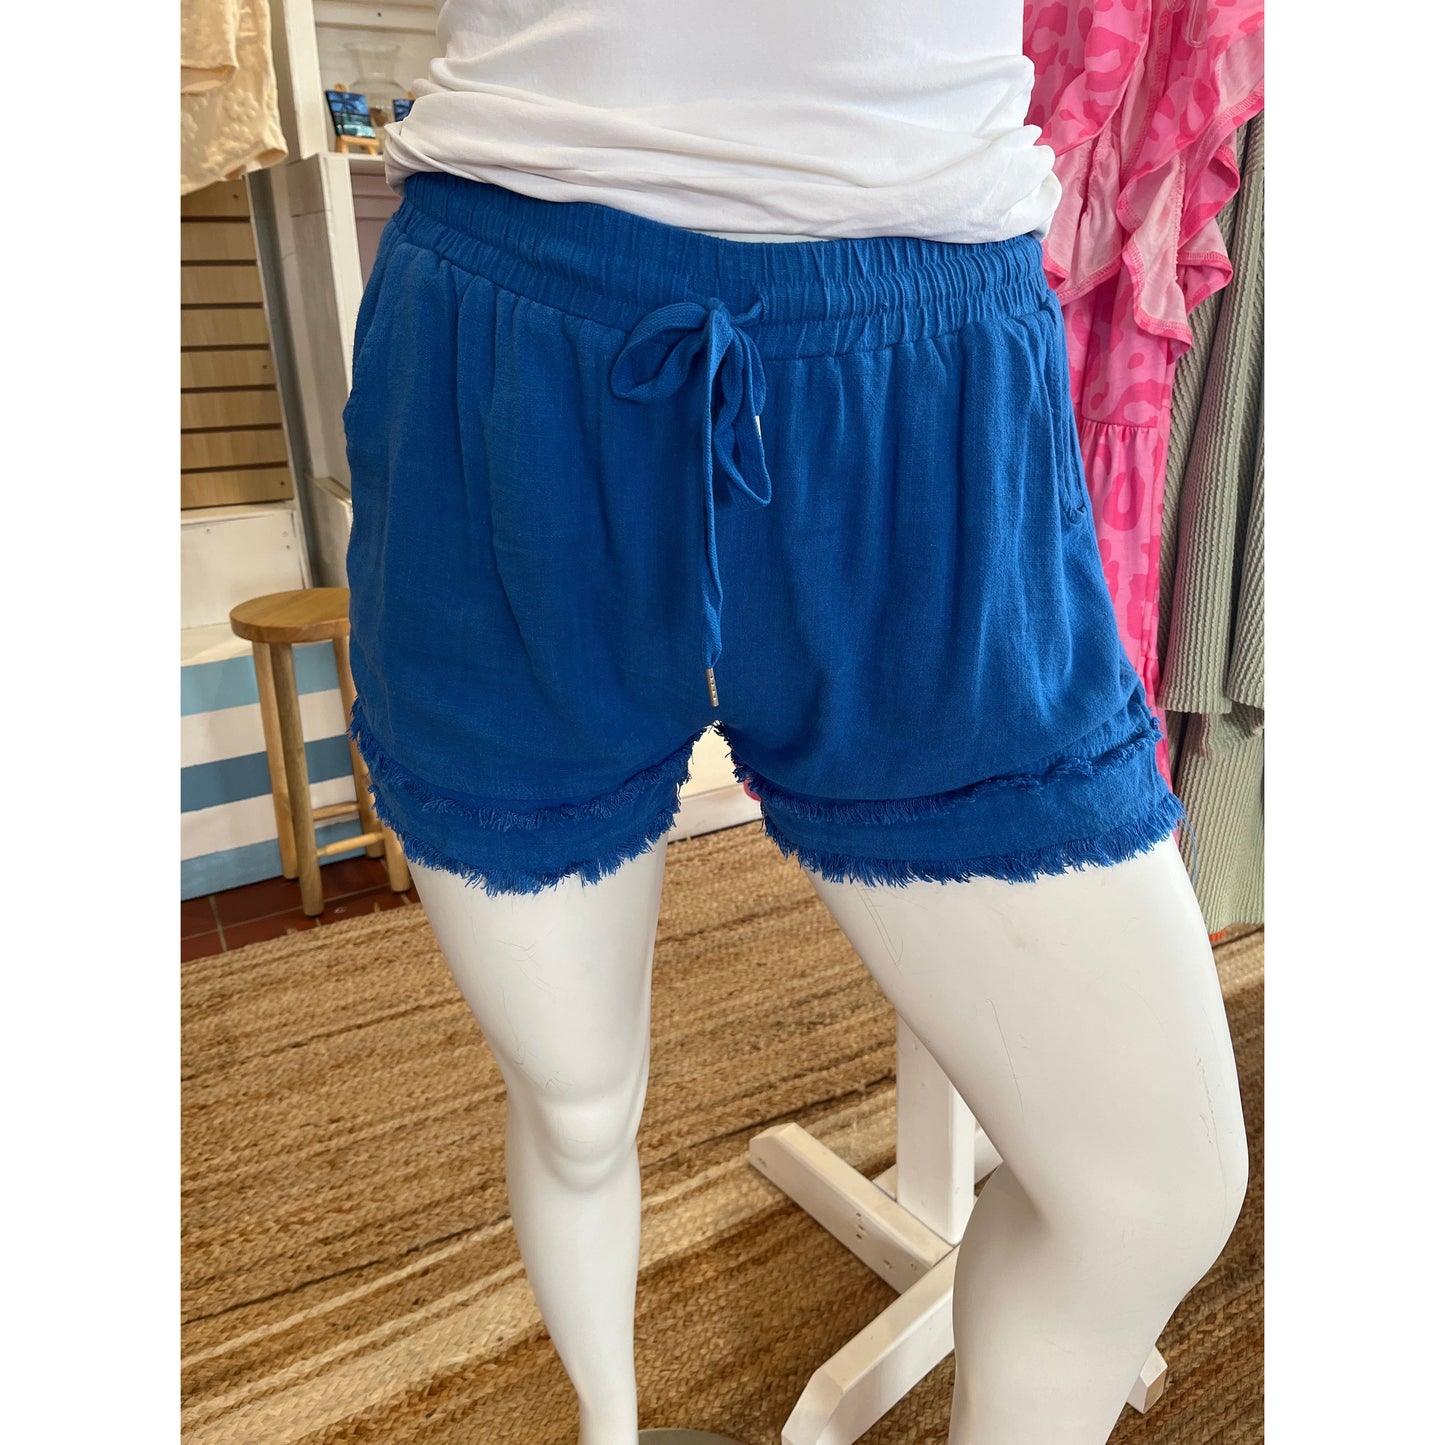 Cobalt plus size linen blend shorts.  Available in sizes Xl, 1X and 2X.  55% Linen, 45% Cotton.  Brand: Umgee